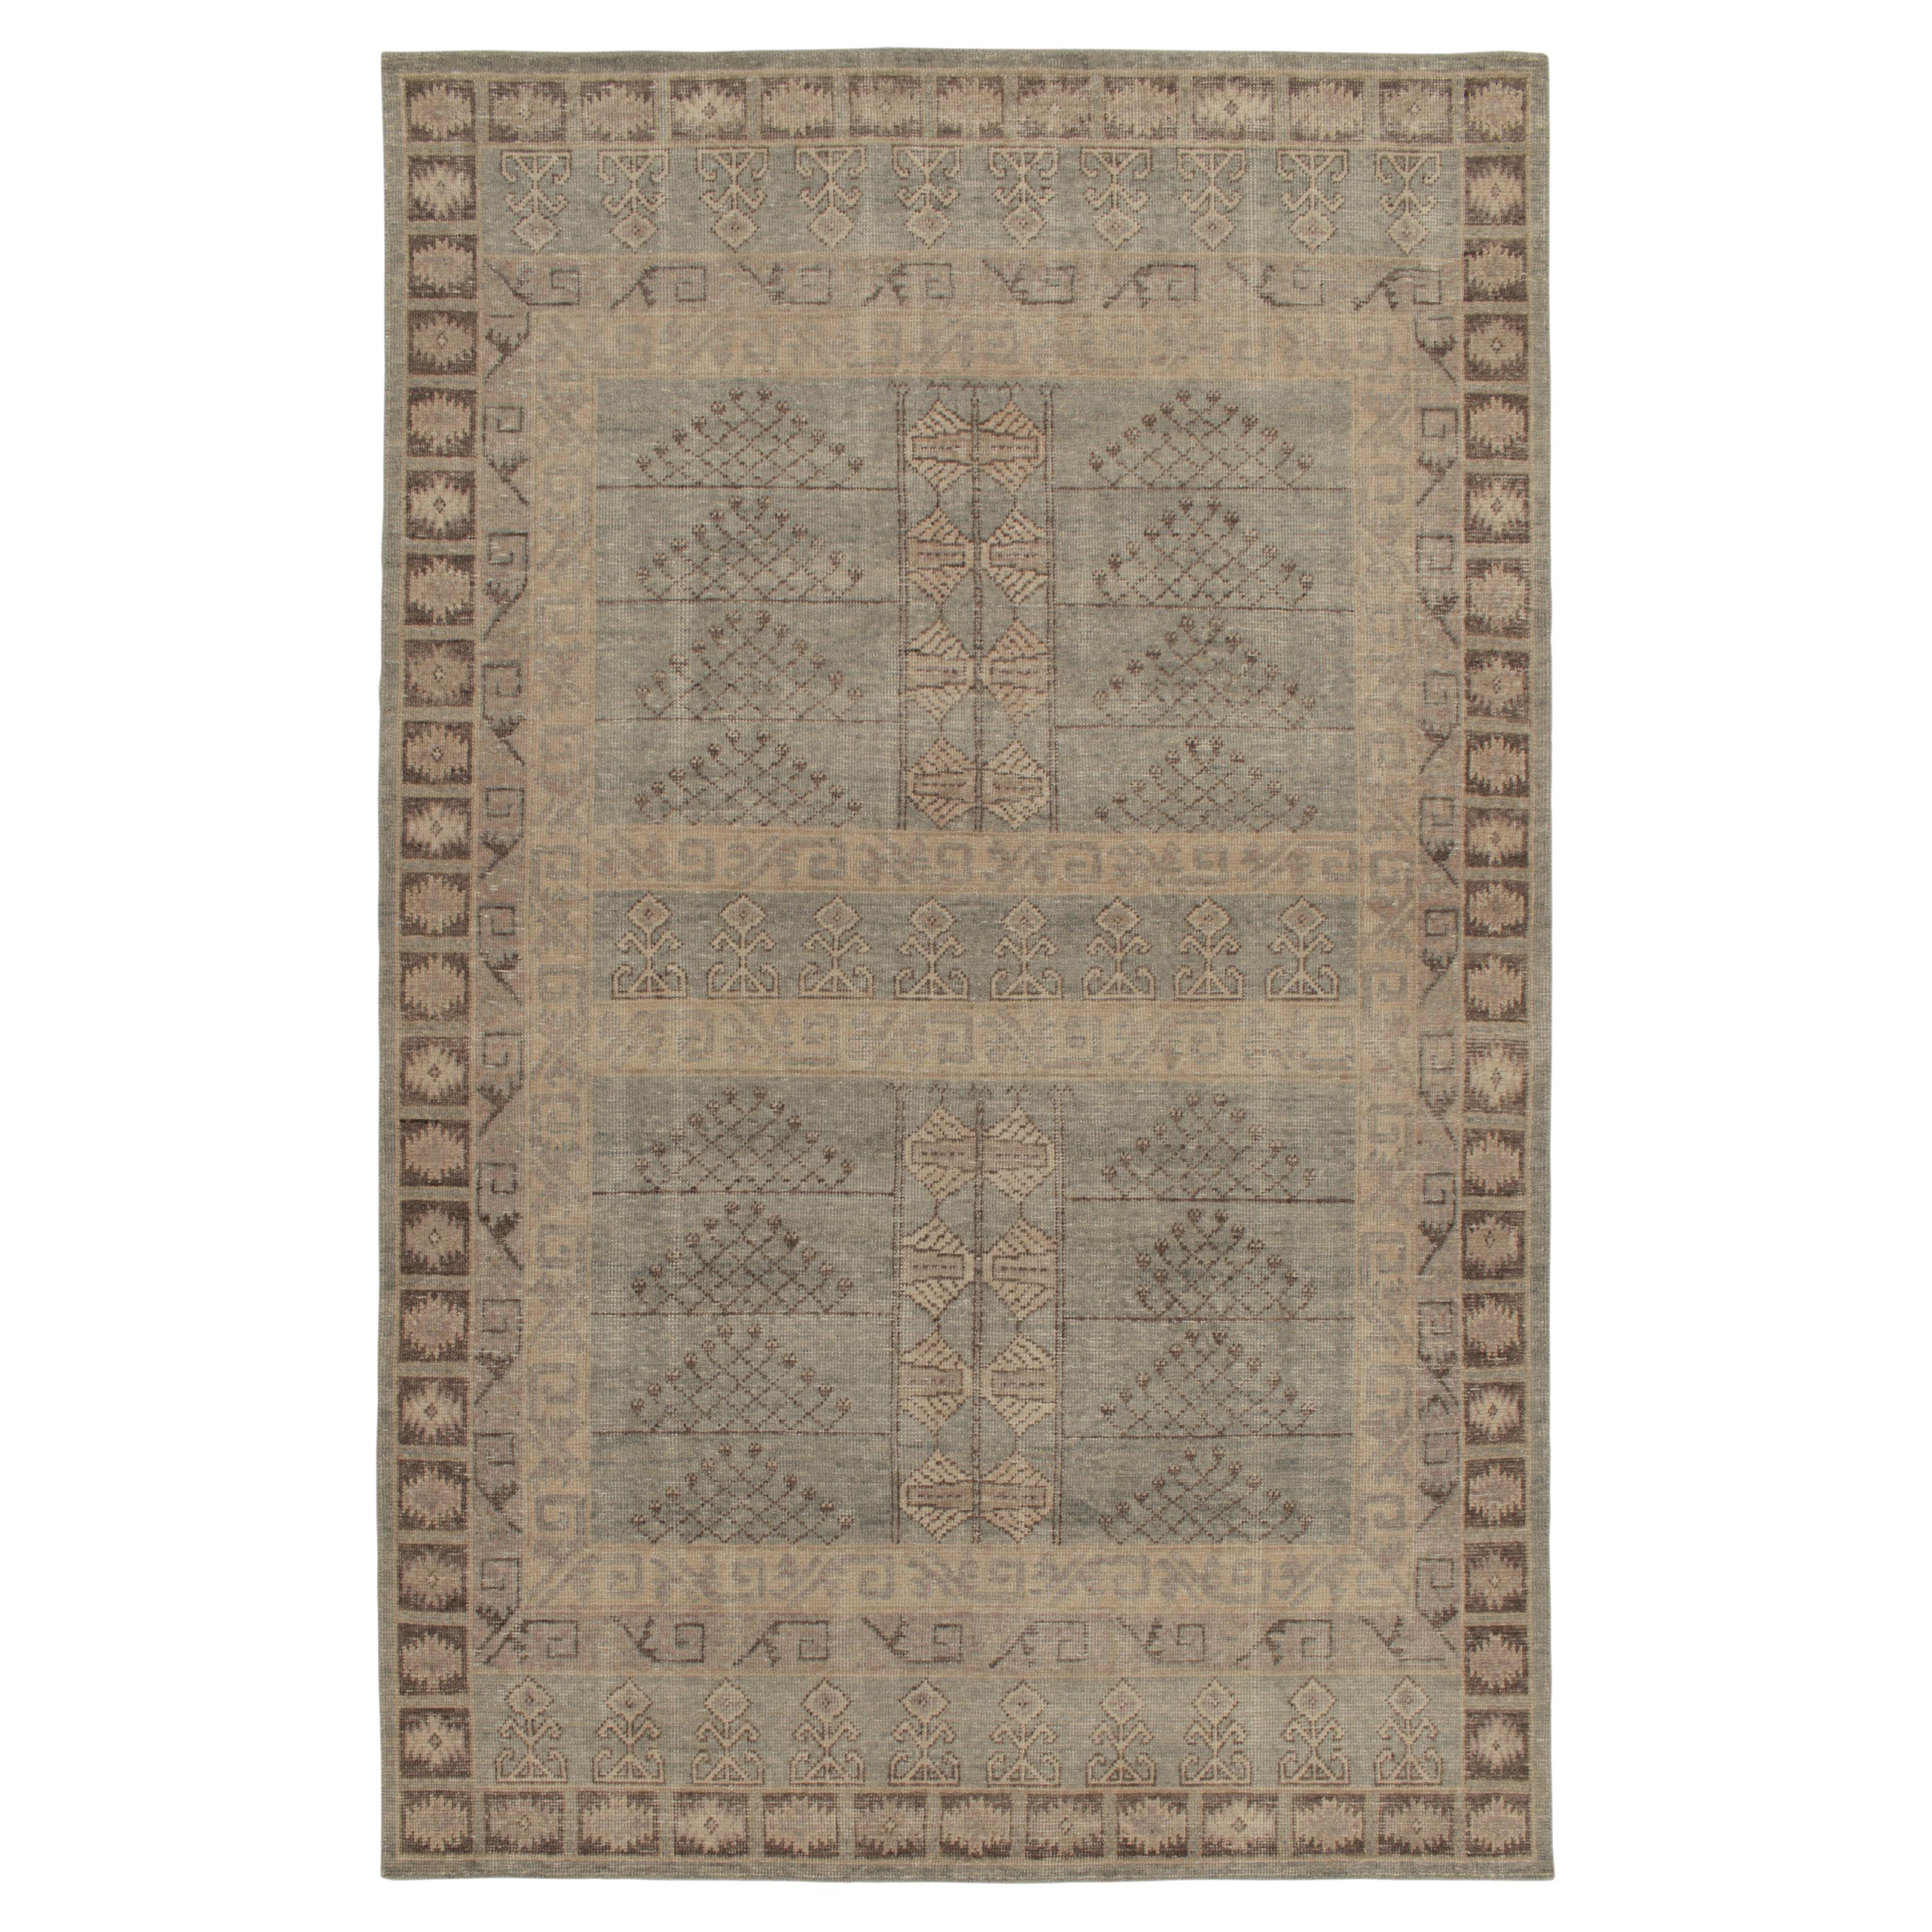 Rug & Kilim’s Distressed Style Rug in Blue and Beige-Brown Ensi Patterns For Sale